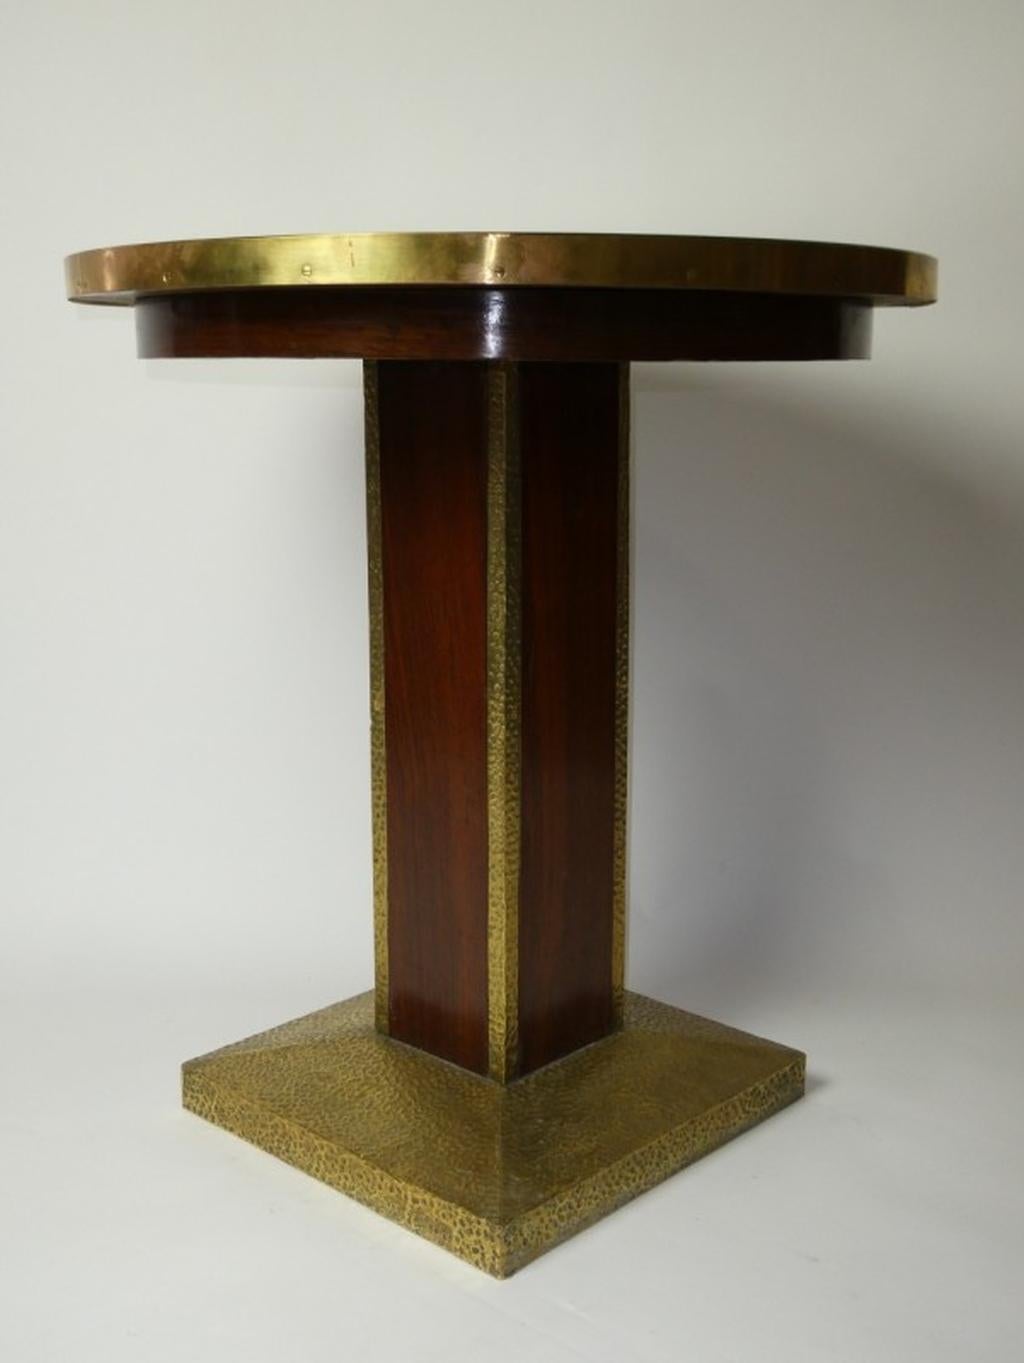 Square base table with wrought iron hoof plate, hammered Viennese decor. Mahogany wood column flanked by wrought iron sheet with hammered decoration. Plateau lined with brass, inset faceted thick-walled glass.